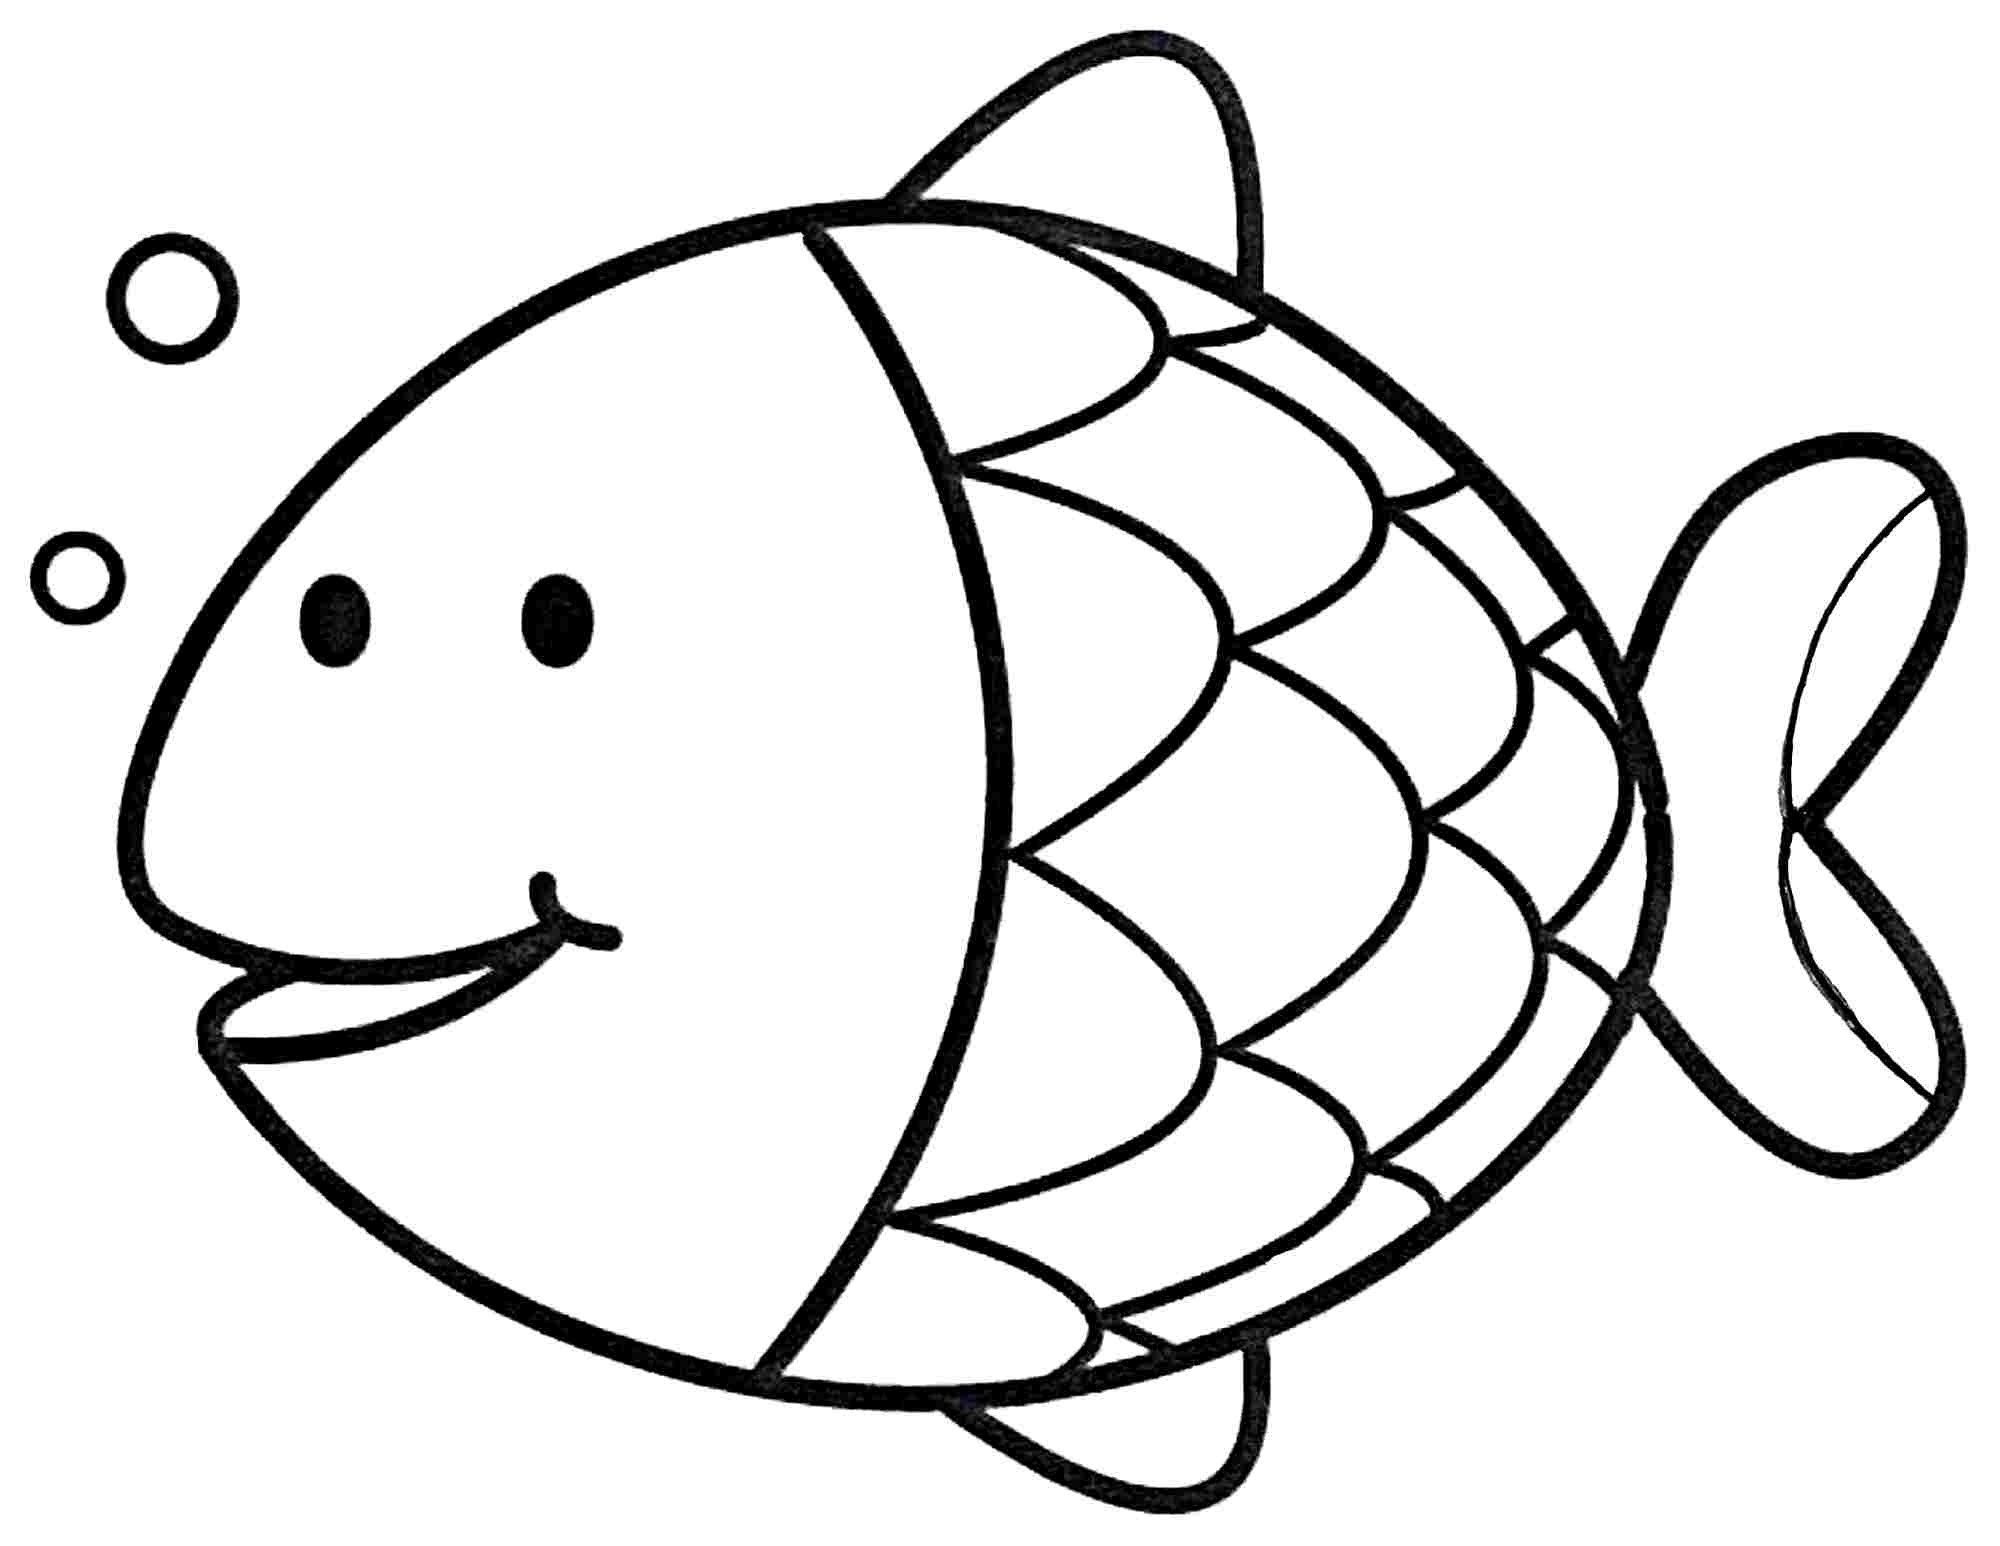 Coloring Pages Fishing Collection Coloring Pages Of Fish Pictures Sabadaphnecottage